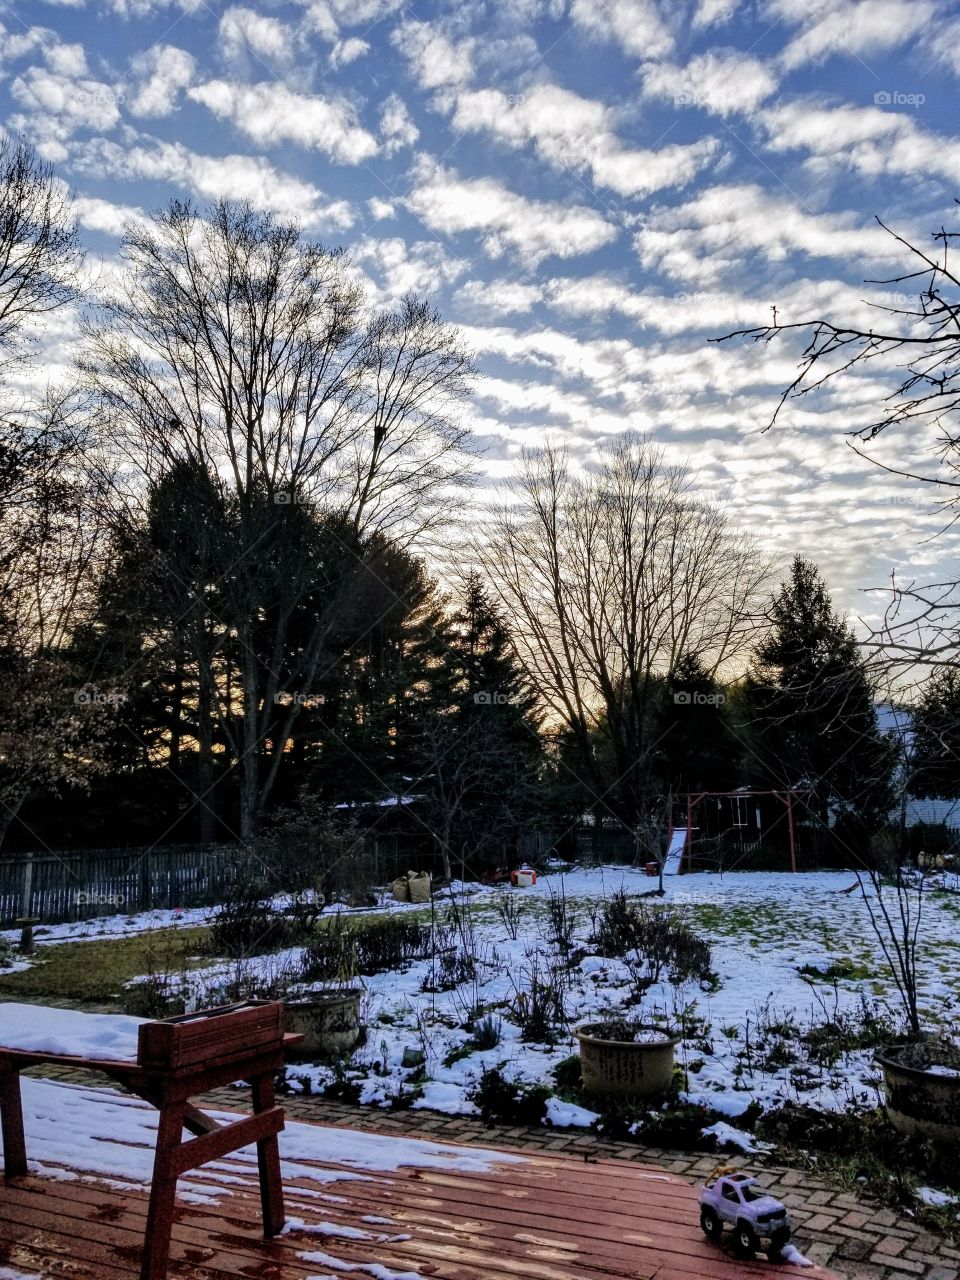 A cloudy winter day in Ellicott City, Maryland